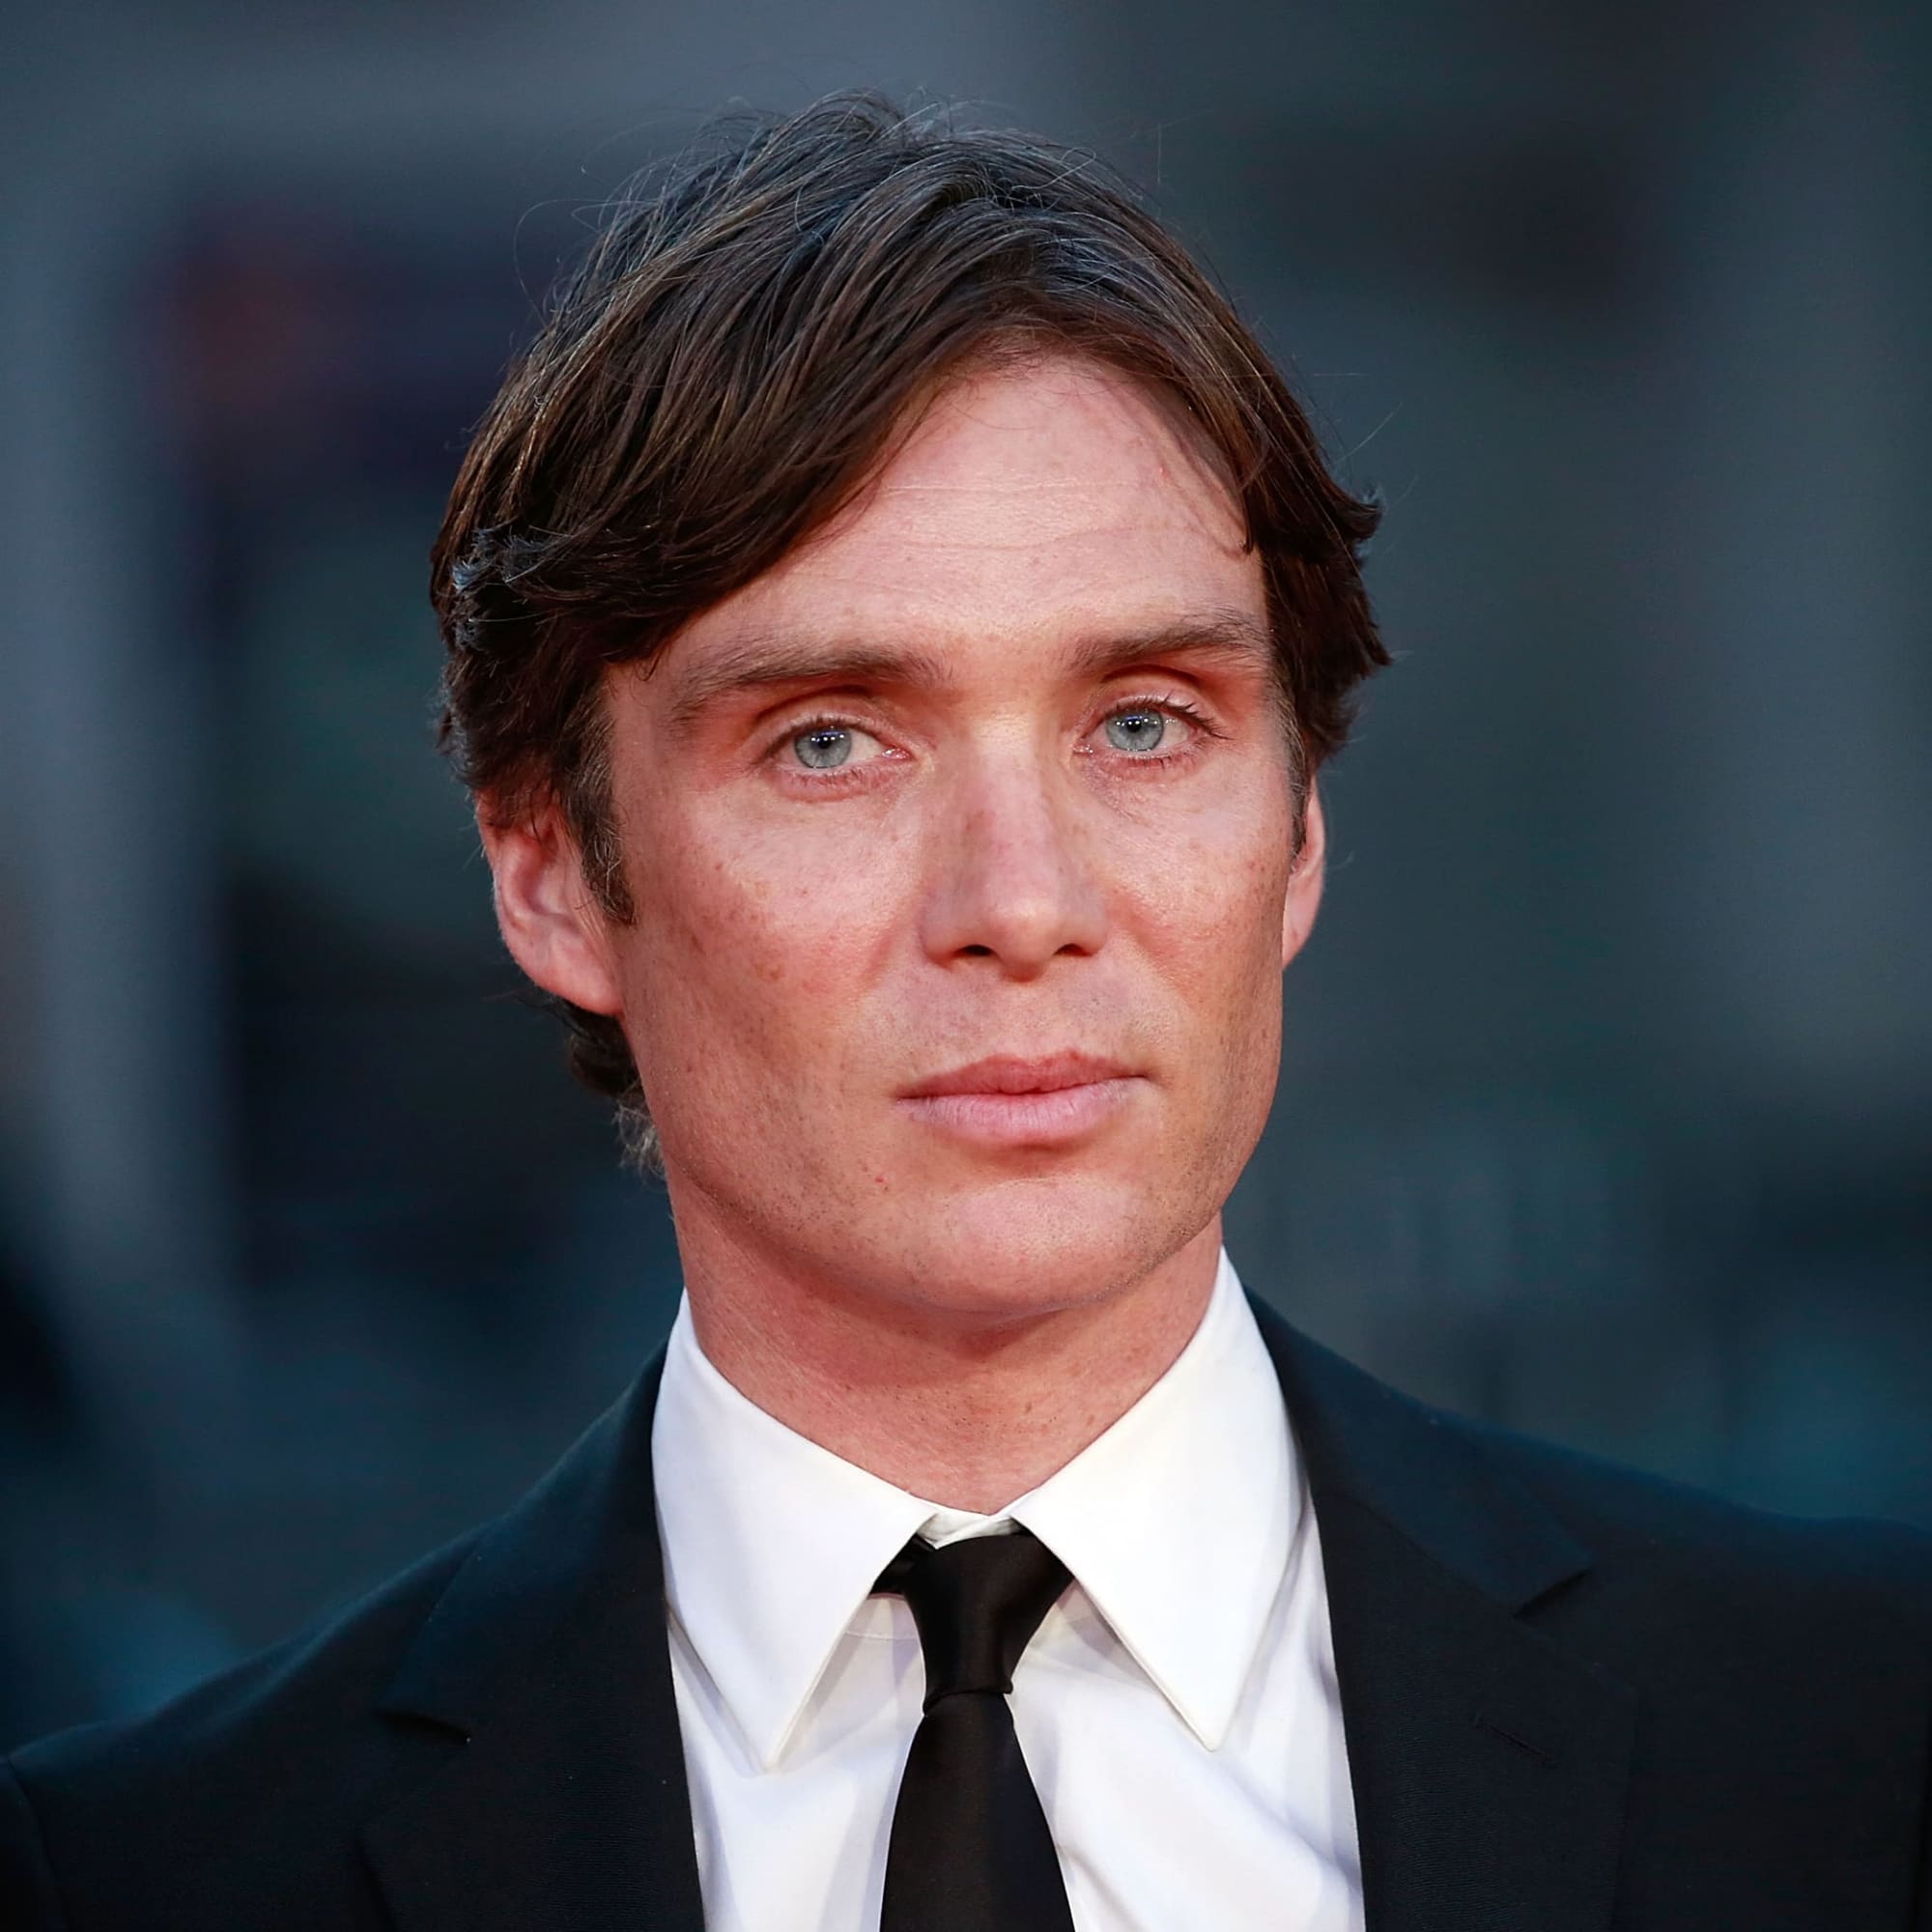 25 Photos That Will Make You Fall in Love With Cillian Murphy